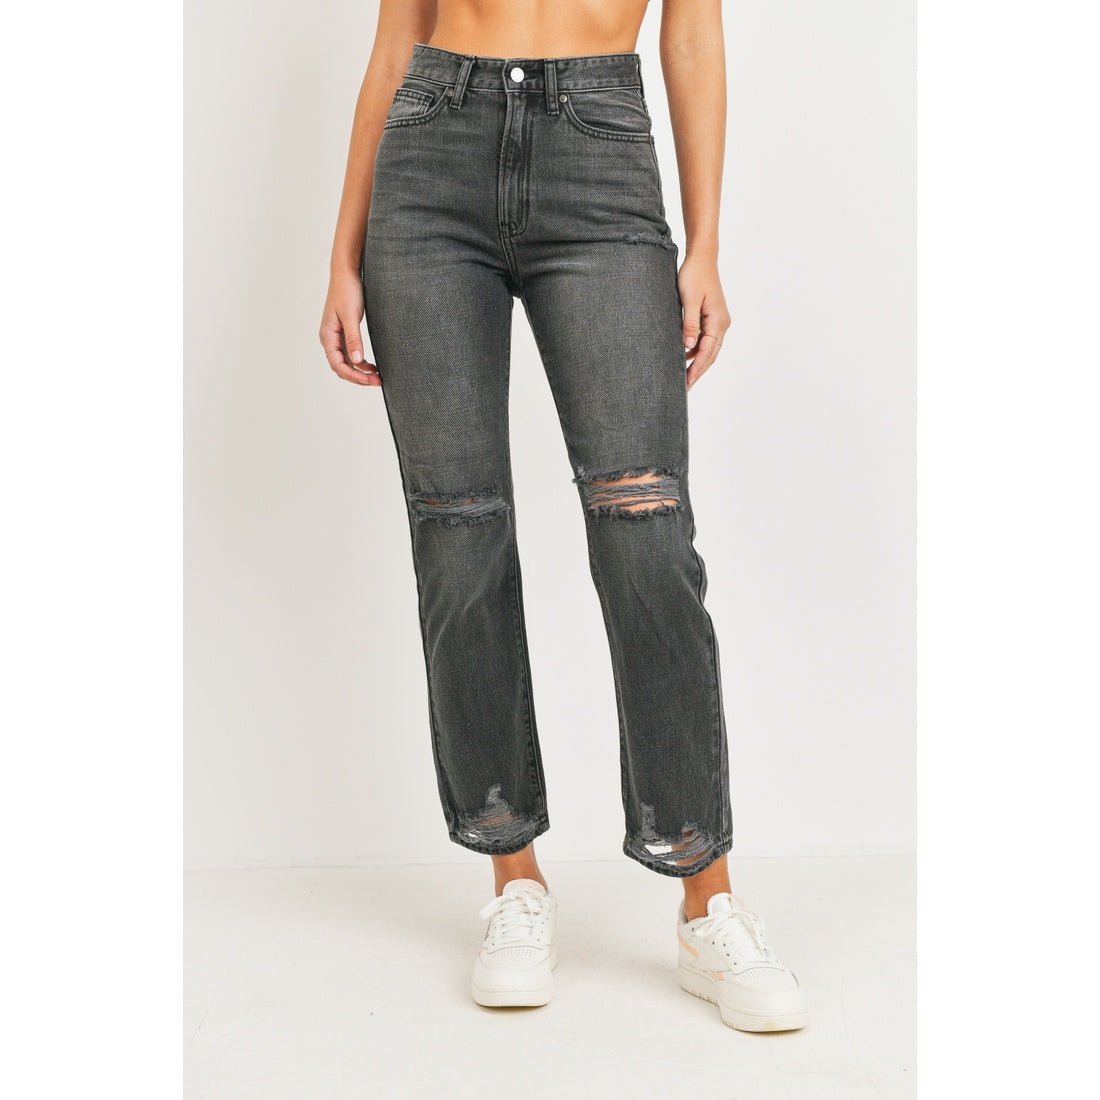 Loose Straight Jean with Distressing - Size 26 - FINAL SALEDESCRIPTION: Washed Black Loose Straight W/ Distress 11.5'' RISE, 28'' INSEAM Made In: Imported Content: 100% Cotton Washing Instructions: Machine Wash / Hang To Dry MODEL IS 5' 9'' WEARING SIZE 2